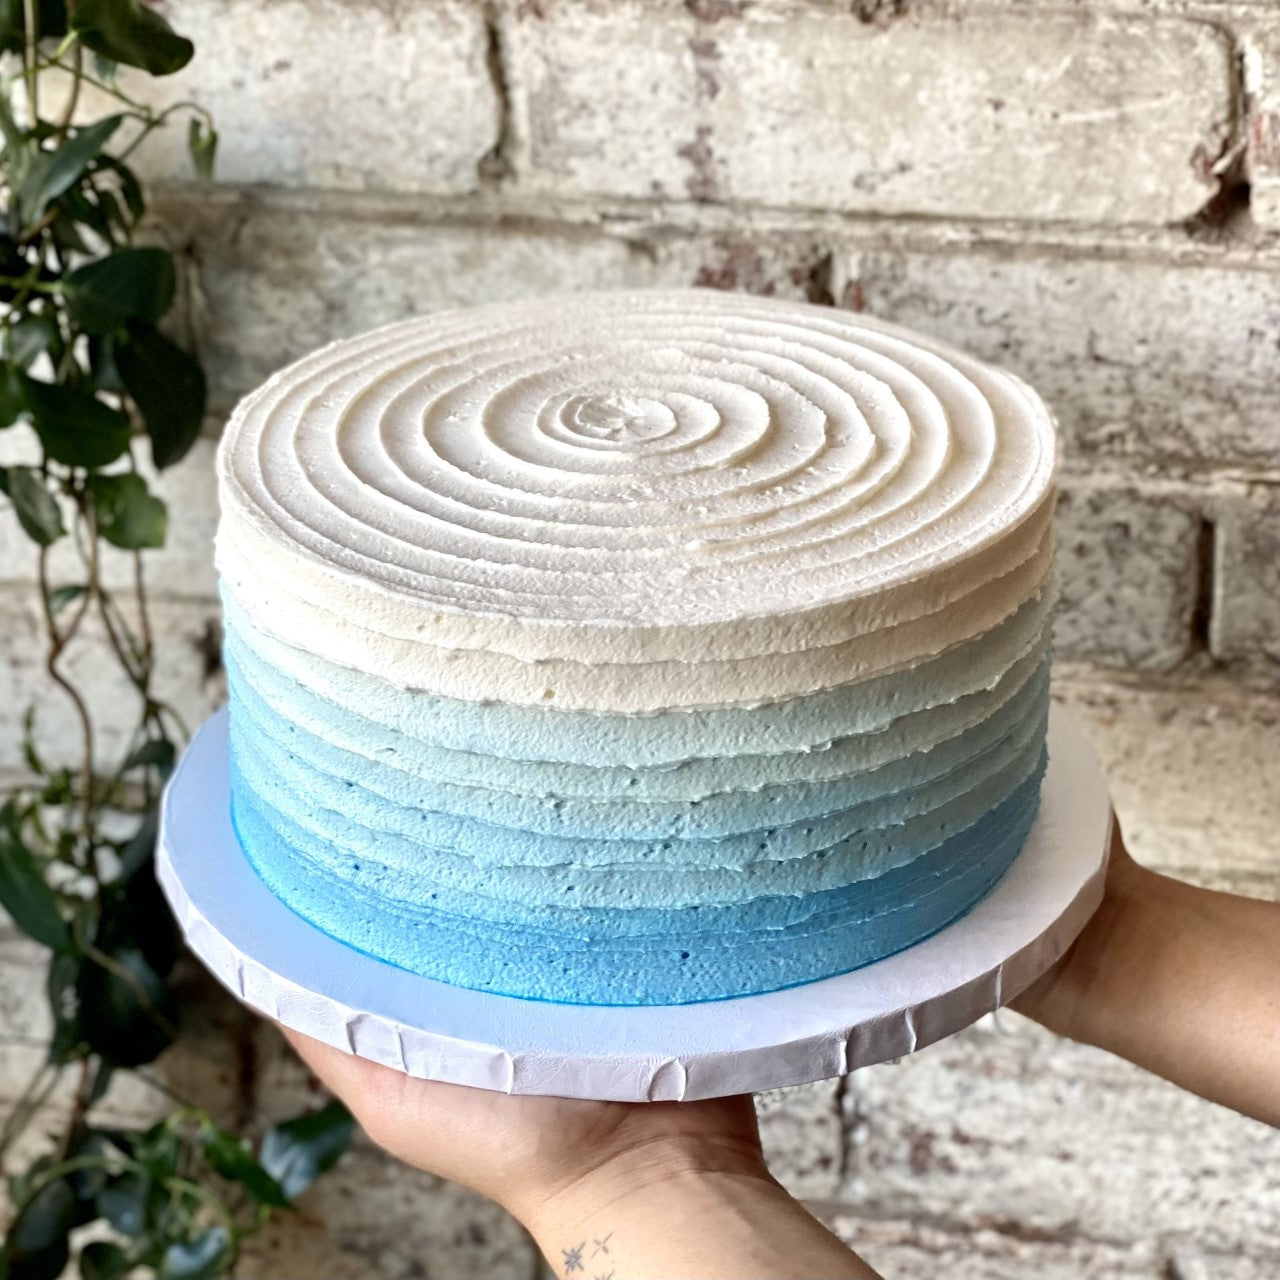 Rustic cake with light blue to white ombre